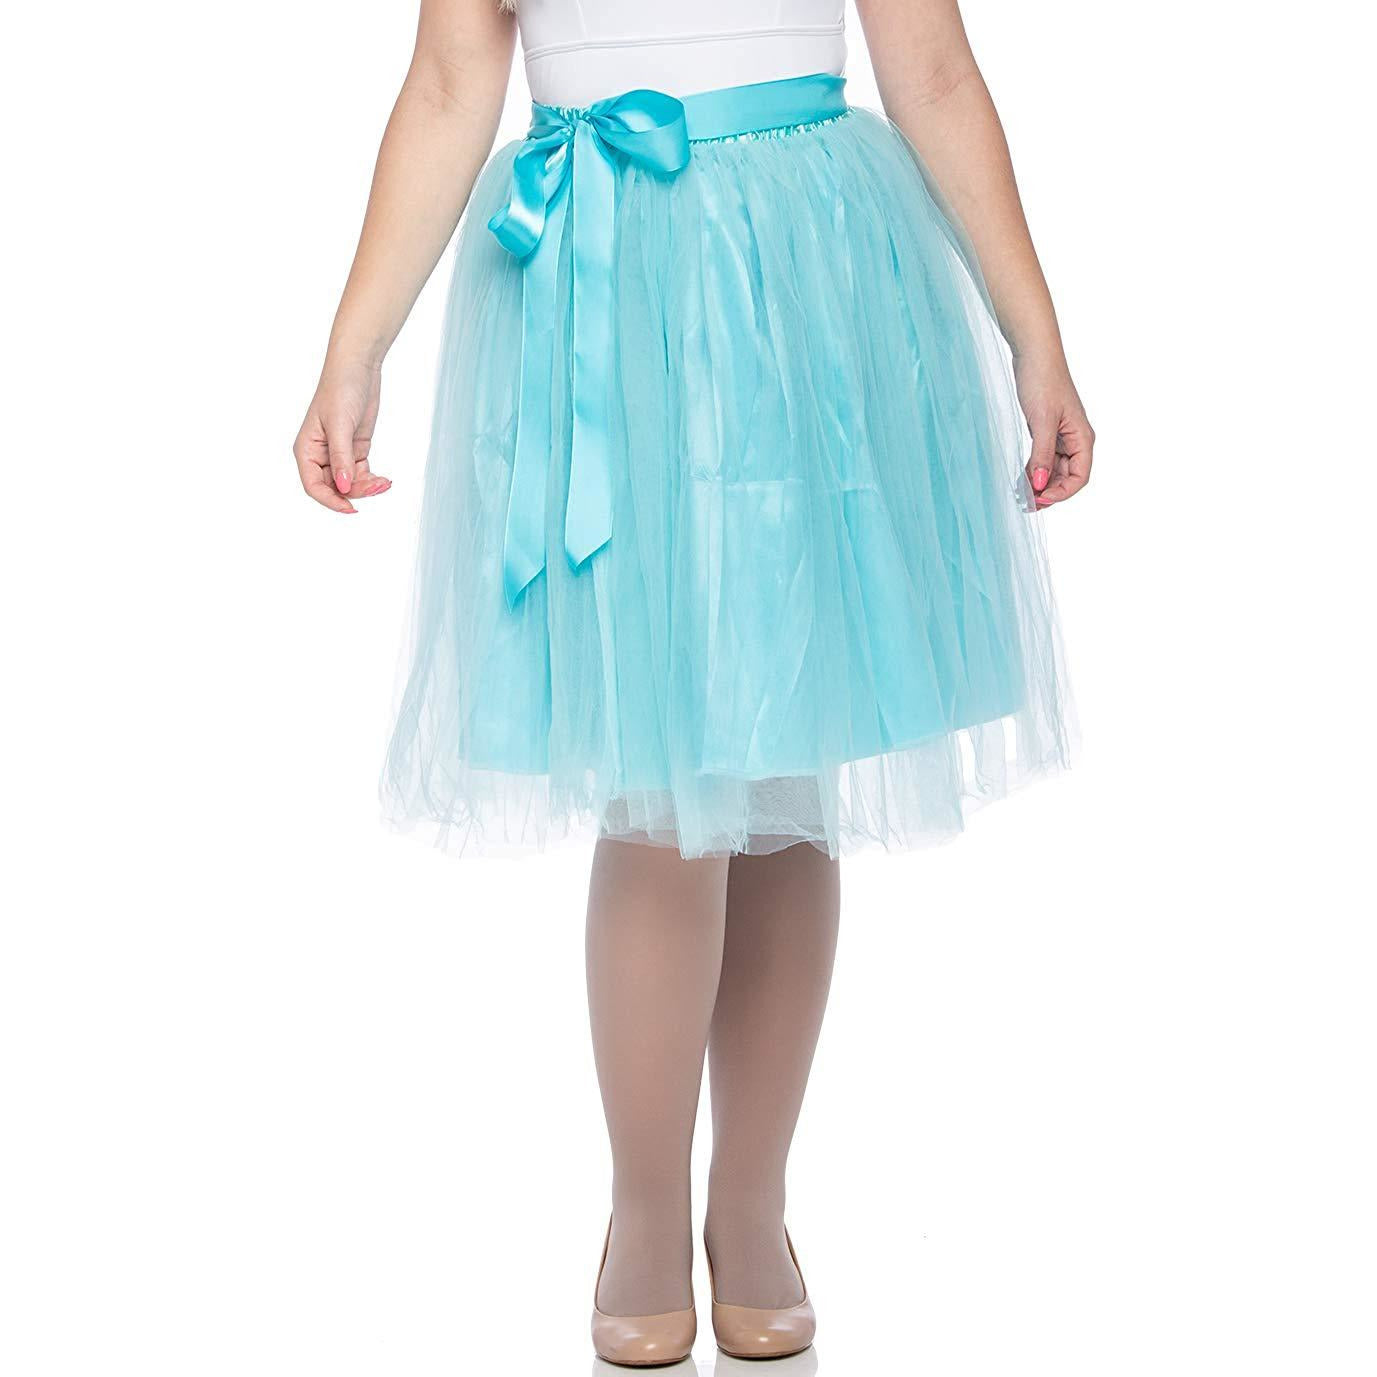 Adults & Girls A-line Knee Length Tutu Tulle Skirt - Regular and Plus Size in Turquoise